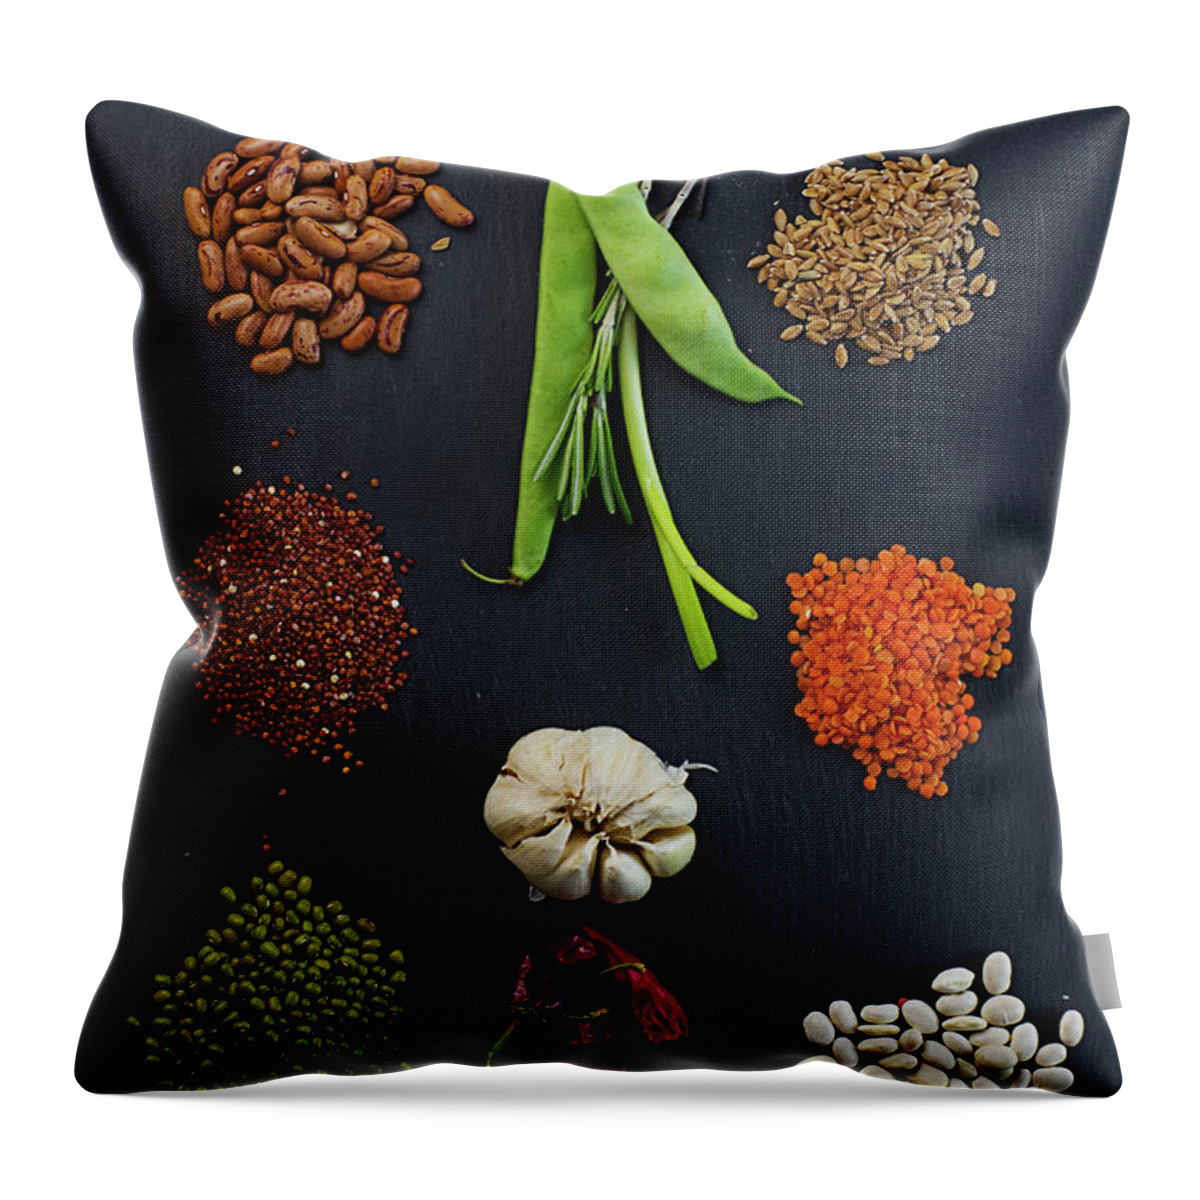 Bulgaria Throw Pillow featuring the photograph Spice Ingredients For Soup by Luluto.blogspot.com